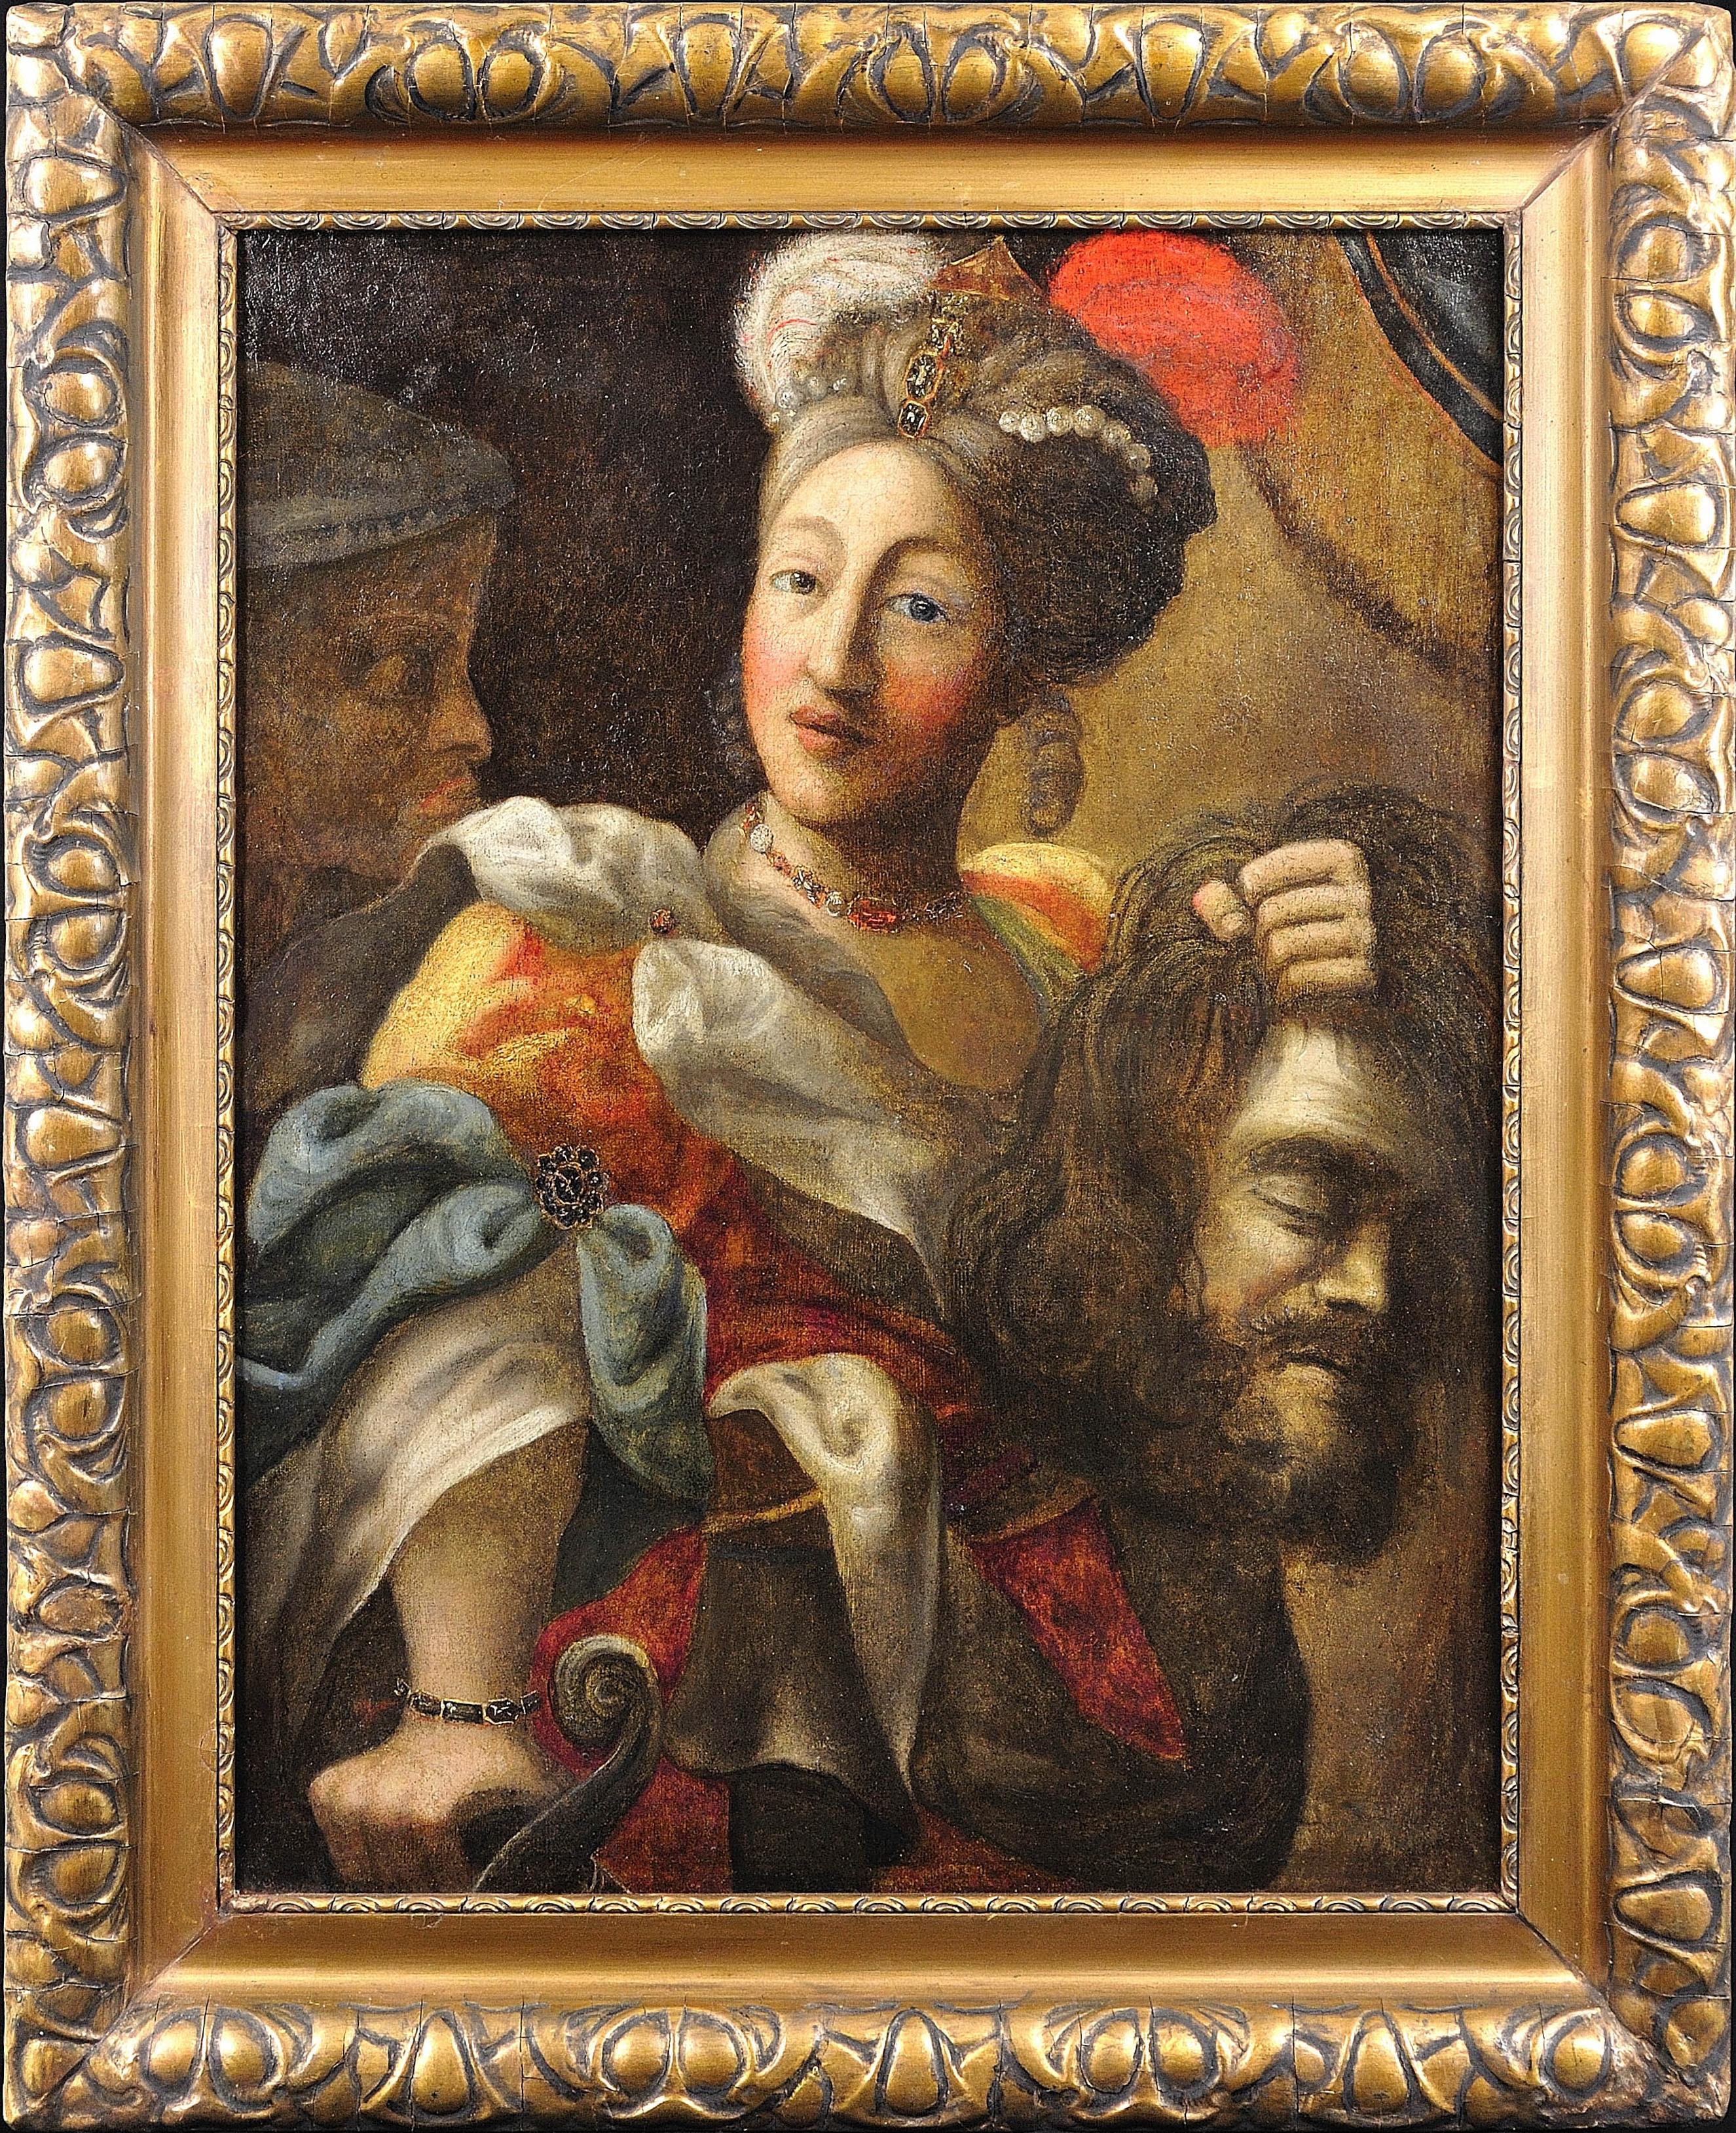 Unknown Figurative Painting - 18th or 19th Century Follower of Rubens. Judith and the Head of Holofernes. Oil